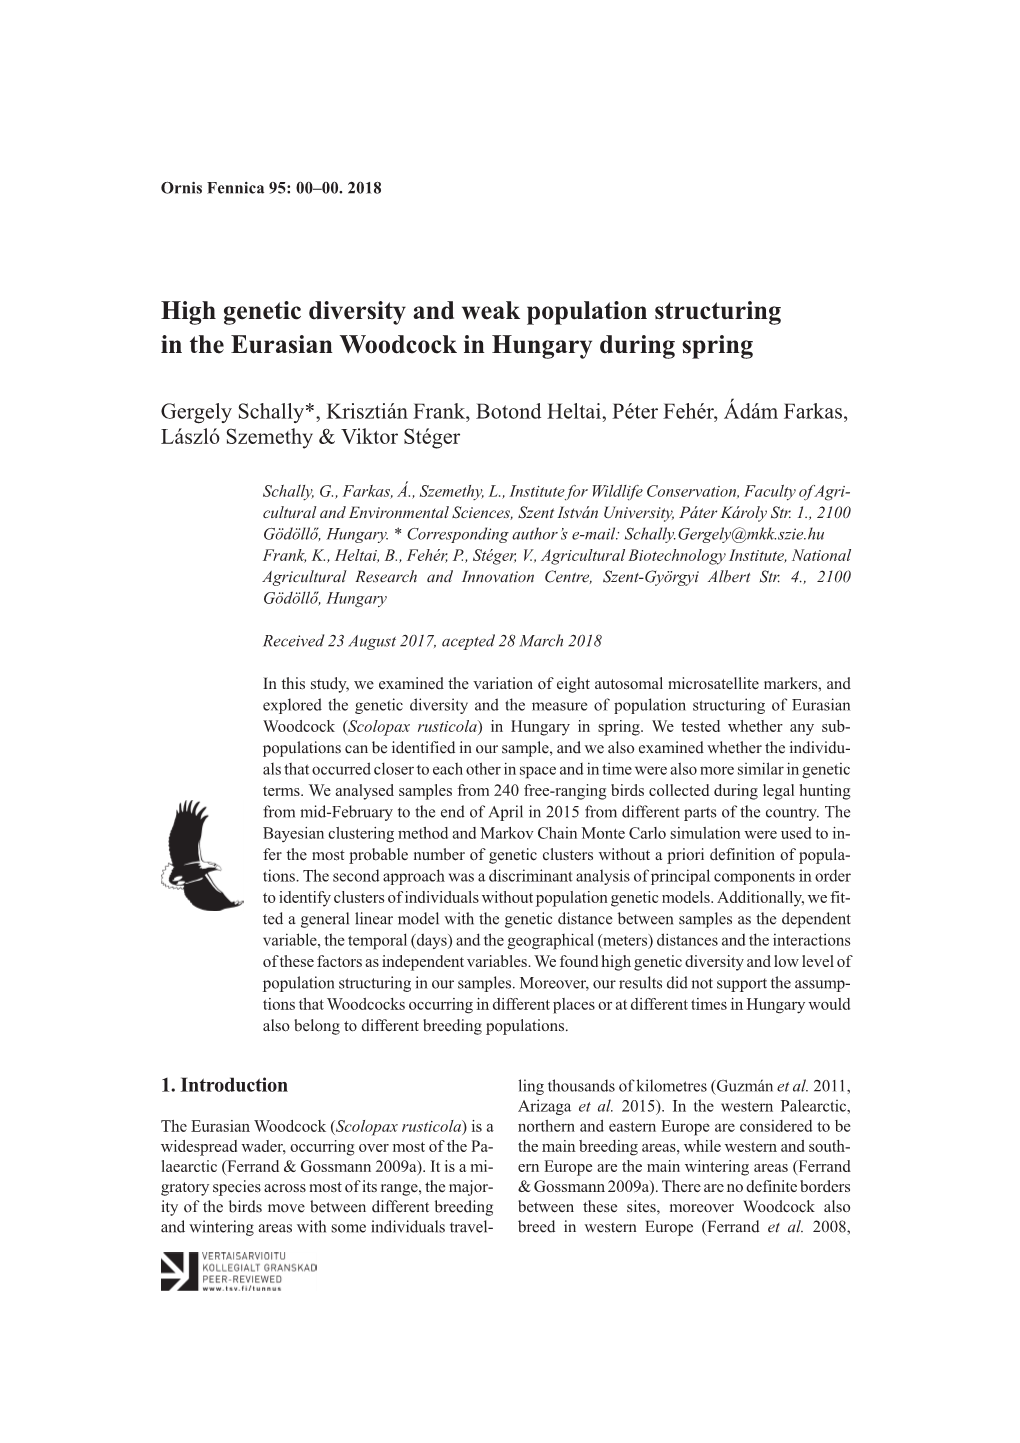 High Genetic Diversity and Weak Population Structuring in the Eurasian Woodcock in Hungary During Spring